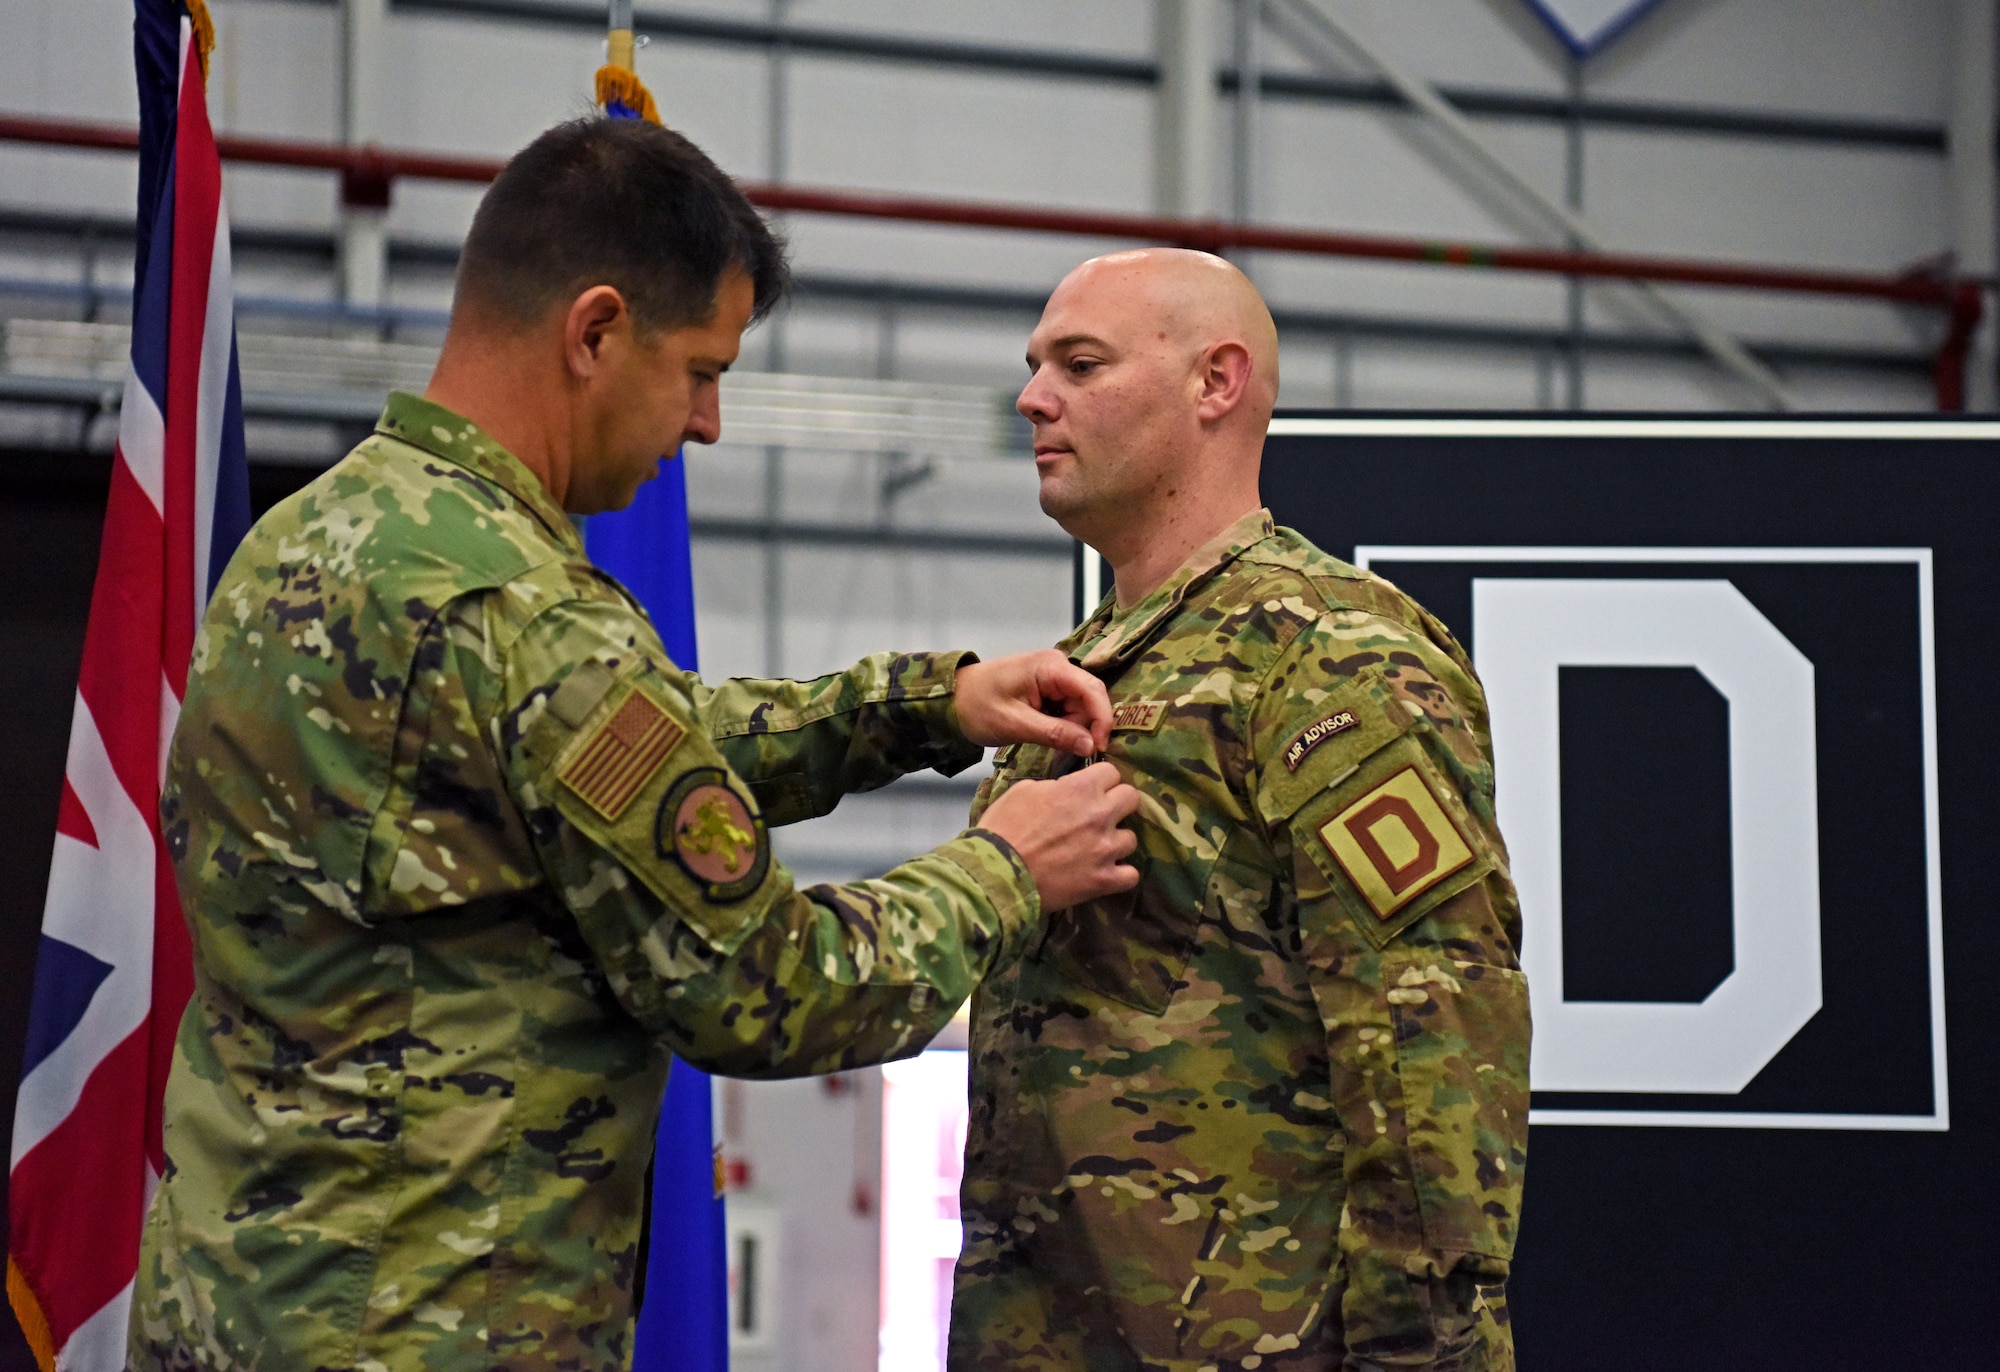 U.S. Air Force Lt. Col. Paul Weme, 100th Maintenance Group commander, pins a Bronze Star Medal on Maj. Aaron Darty, 100th Maintenance Squadron operations officer, during a ceremony held at RAF Mildenhall, England, July 1, 2019. Darty was recently awarded the Bronze Star Medal for meritorious achievement as operations officer and maintenance advisor in support of Operation Freedom Sentinel while deployed to Kandahar Airfield, Afghanistan. (U.S. Air Force photo by Airman 1st Class Brandon Esau)